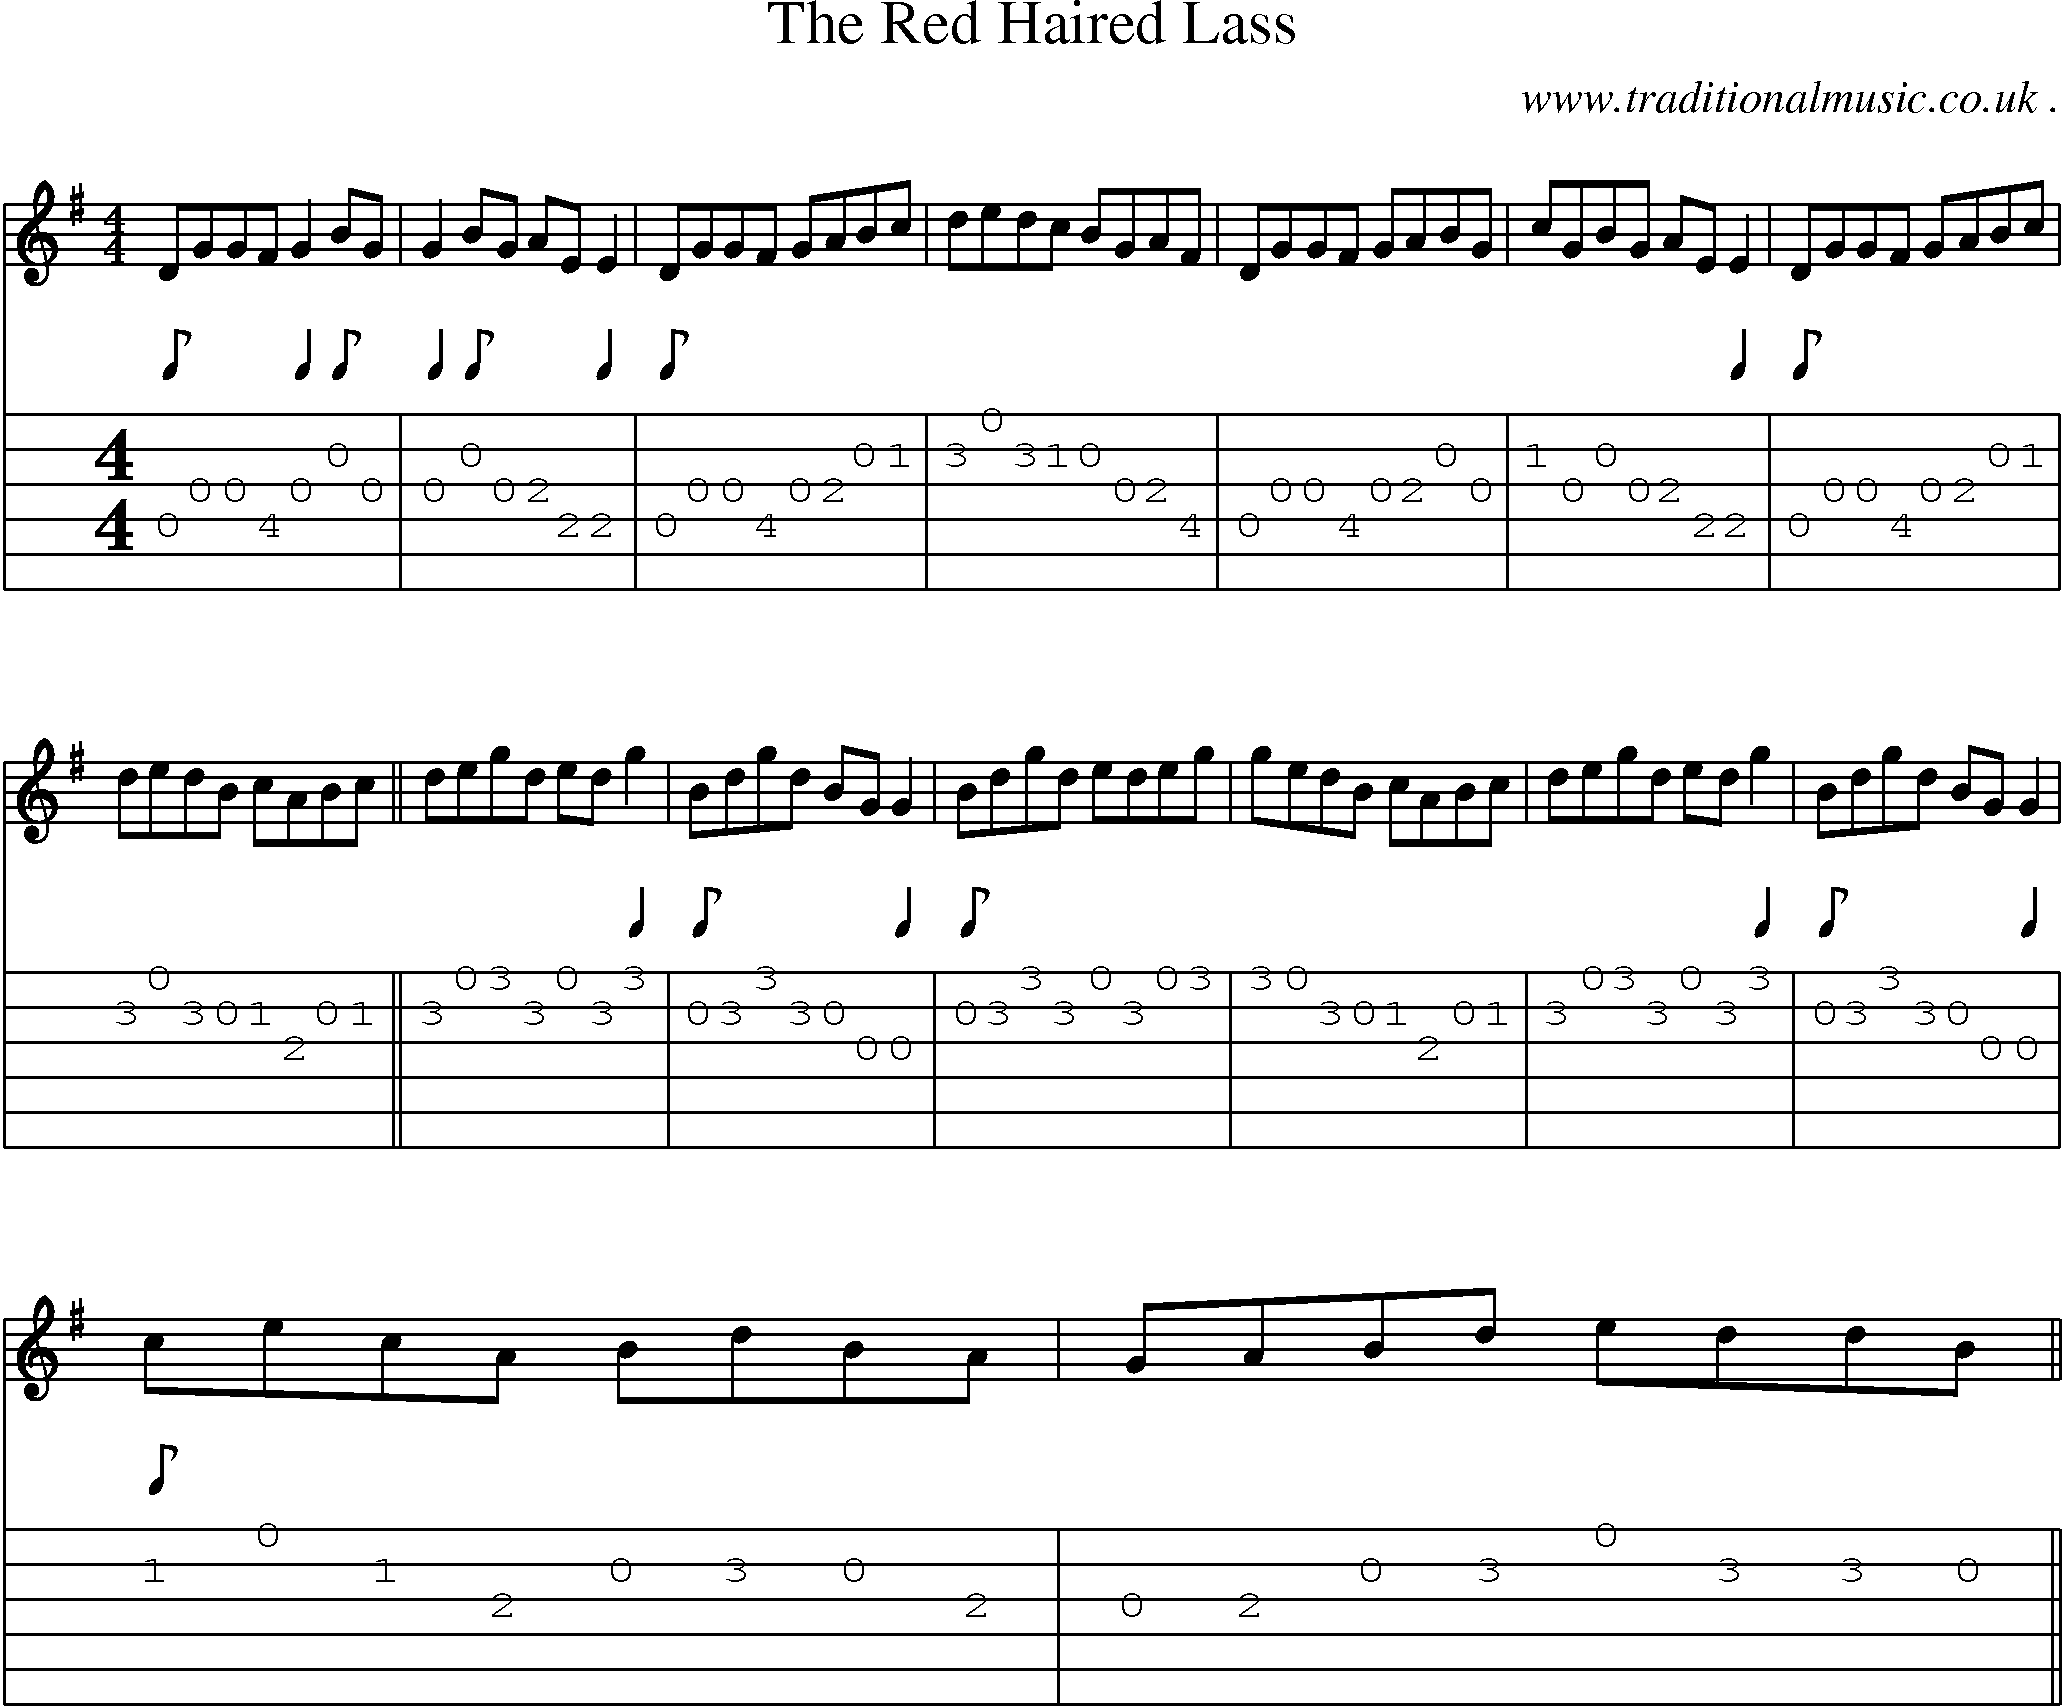 Sheet-Music and Guitar Tabs for The Red Haired Lass